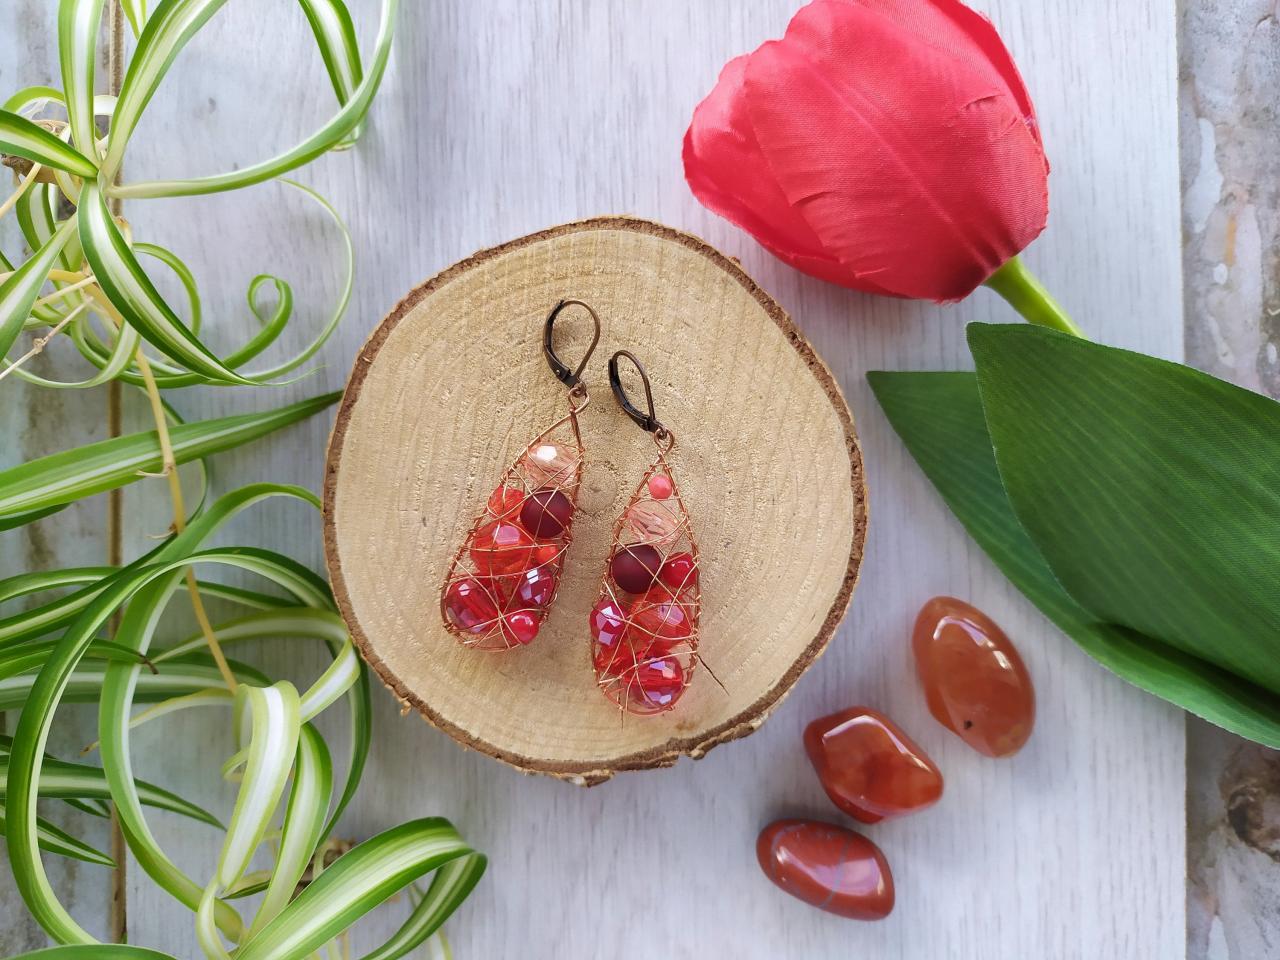 Wire Wrapped Drop Earrings In Red, Red And Copper Earrings, Mismatched Red Bohemian Earrings,red Boho Dangles,statement Jewelry,gift For Her